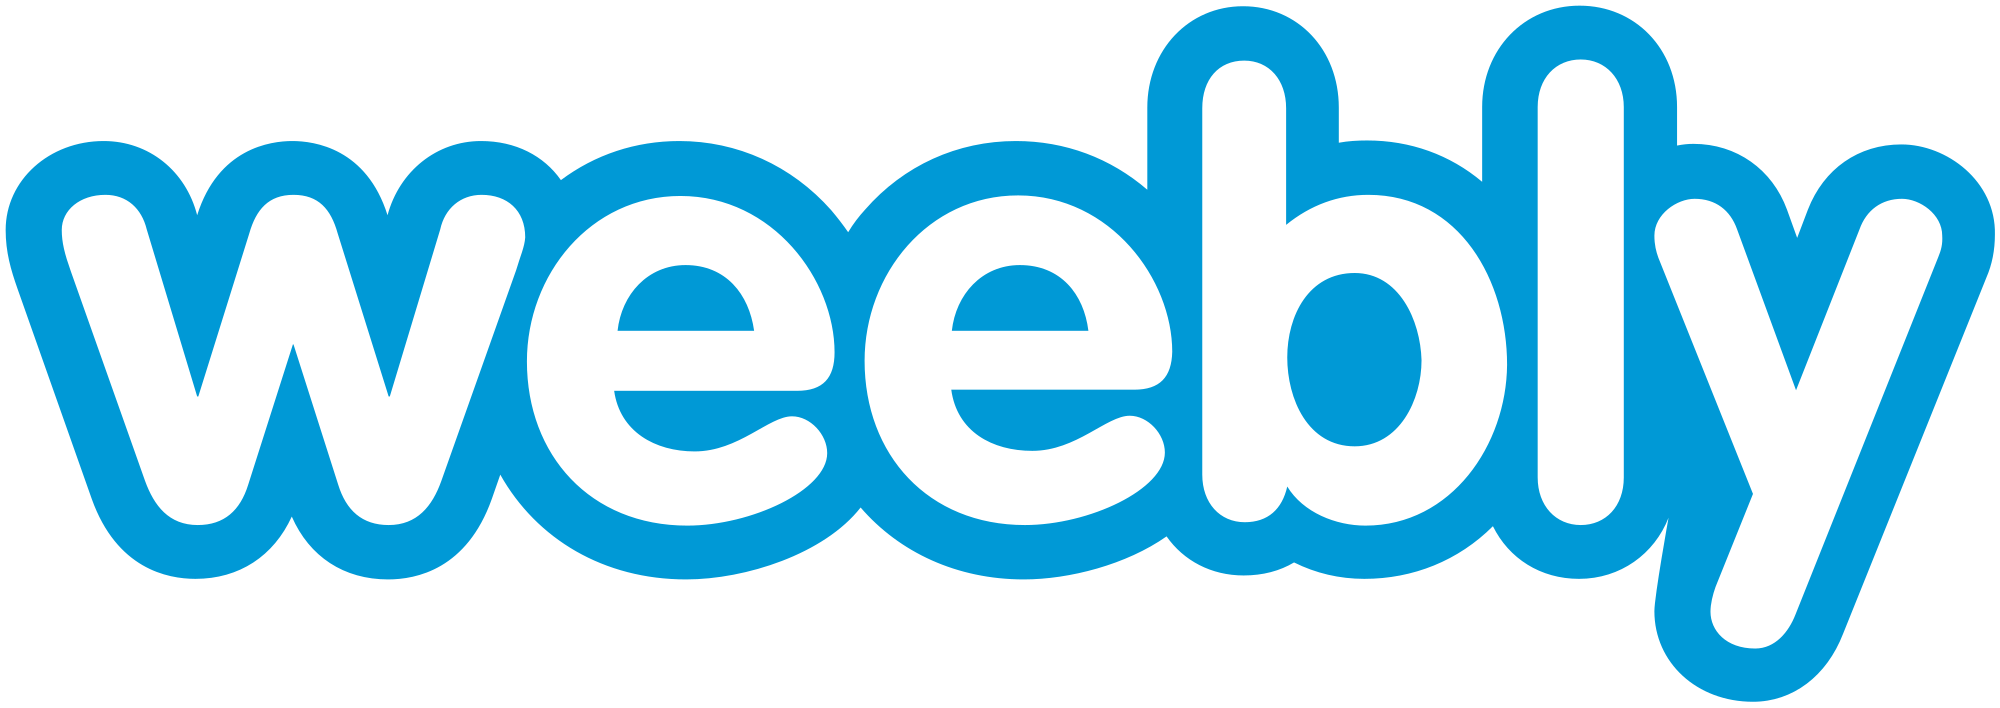 Weebly Logo - File:Weebly logo.svg - Wikimedia Commons